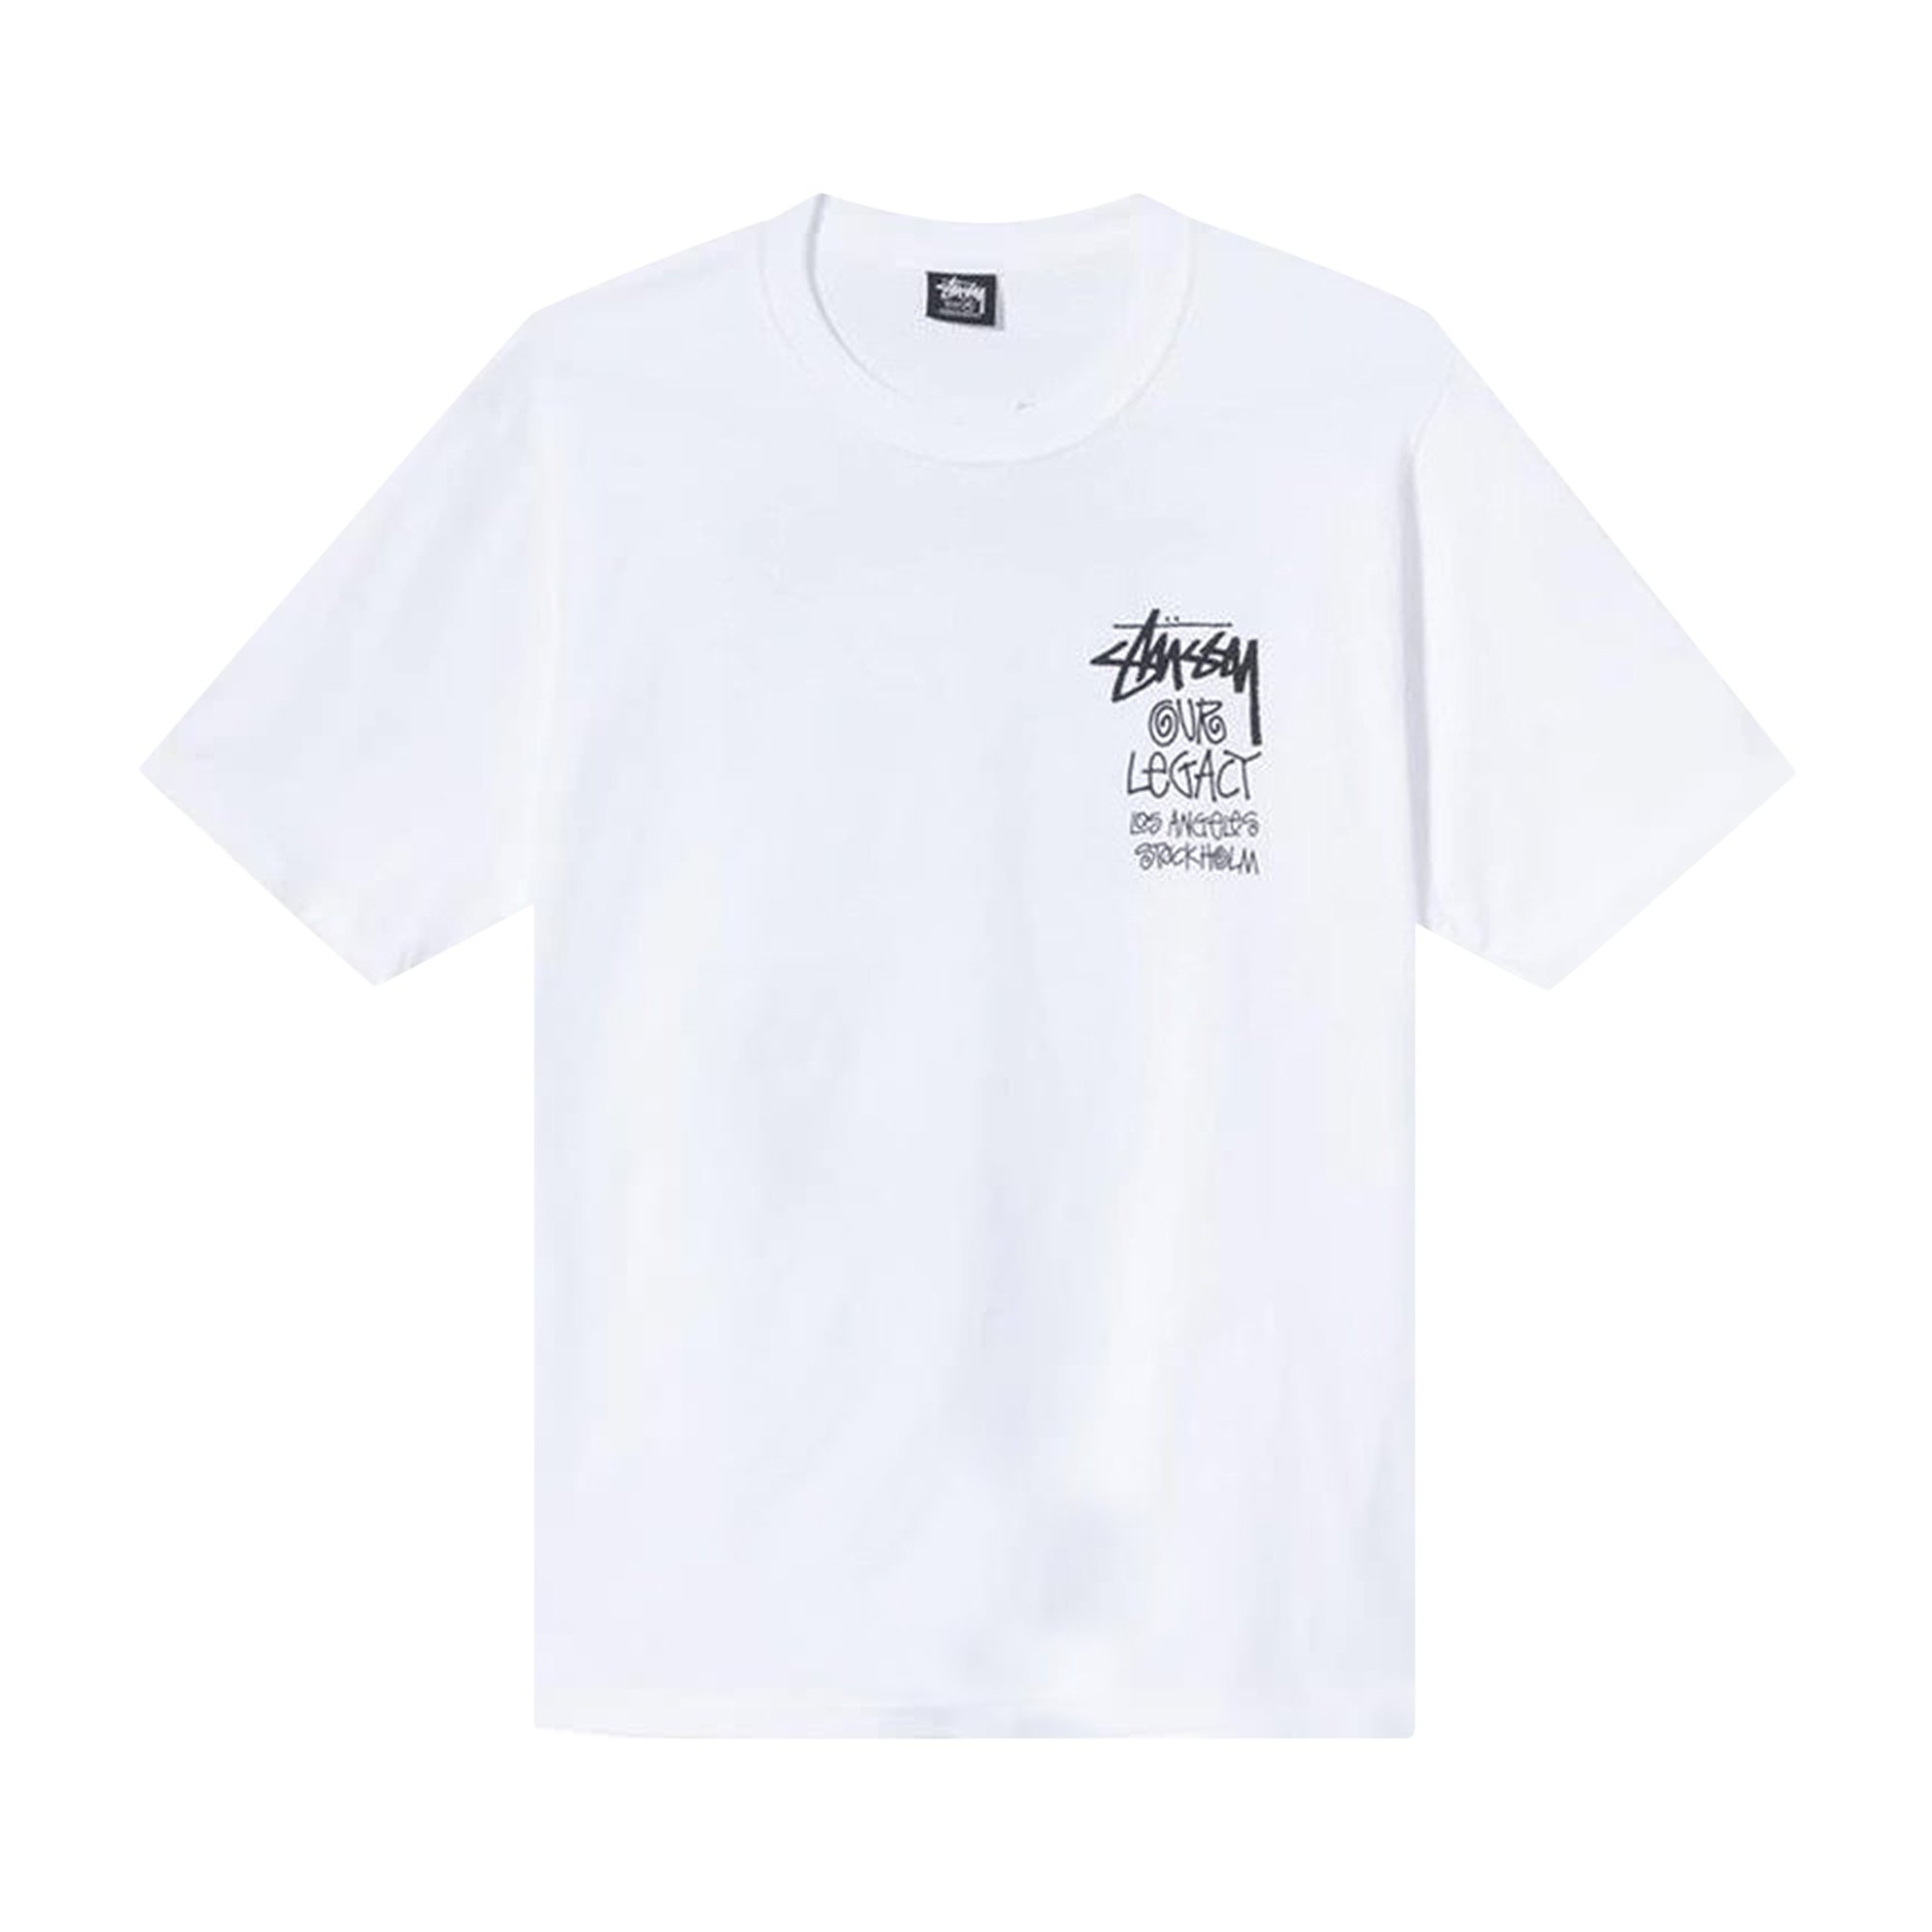 Buy Stussy x Our Legacy Surfman Tee 'White' - 3903655 WHIT | GOAT IT